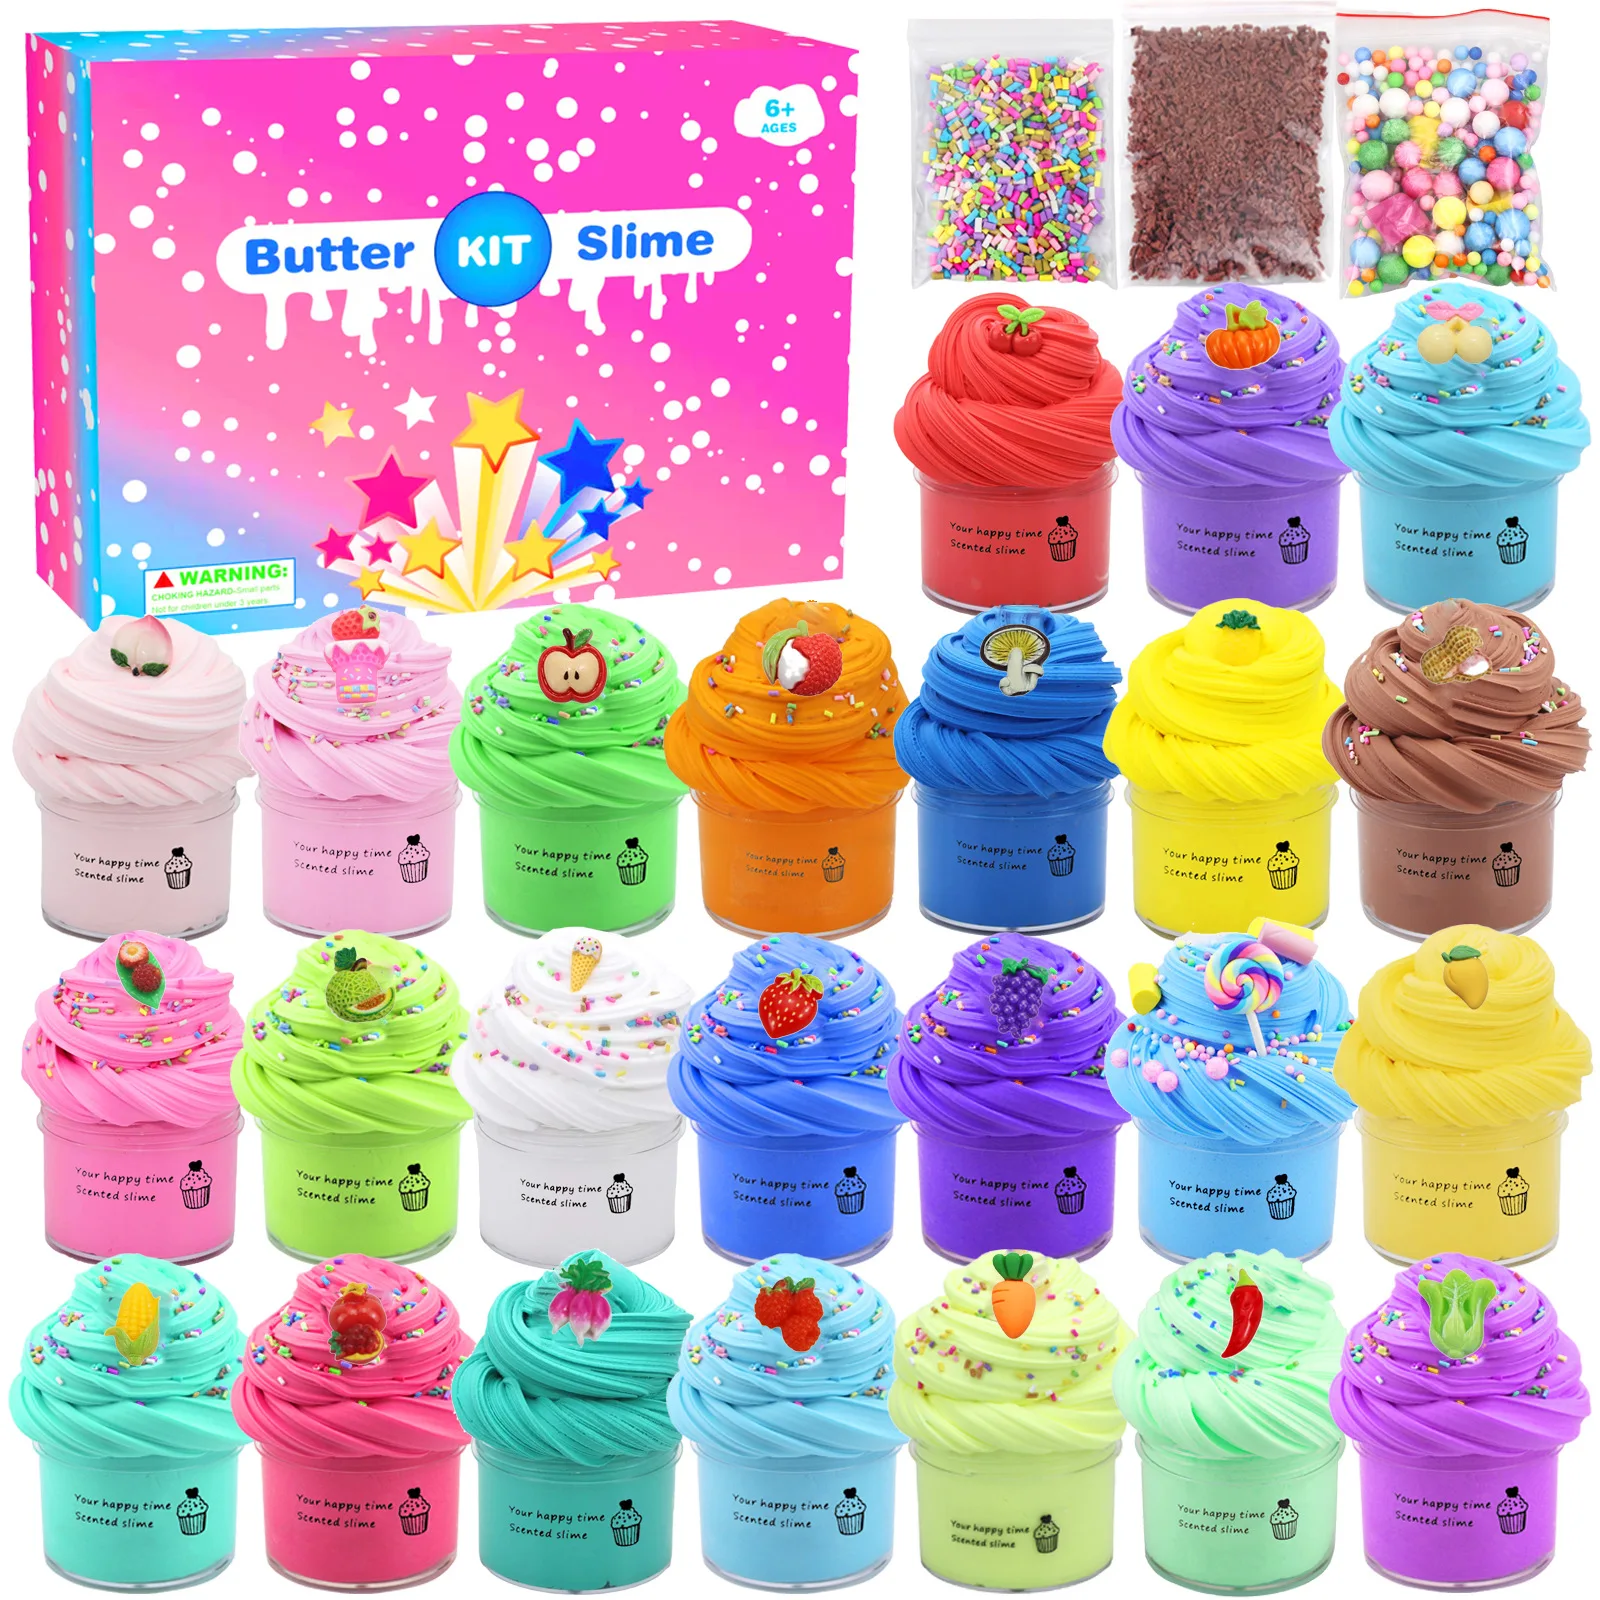 

24 Pack 50ml Stress Relief Toys Non-toxic Non-Sticky Soft Cotton Candy Cloud Ice Cream DIY Making Butter Slime Kit